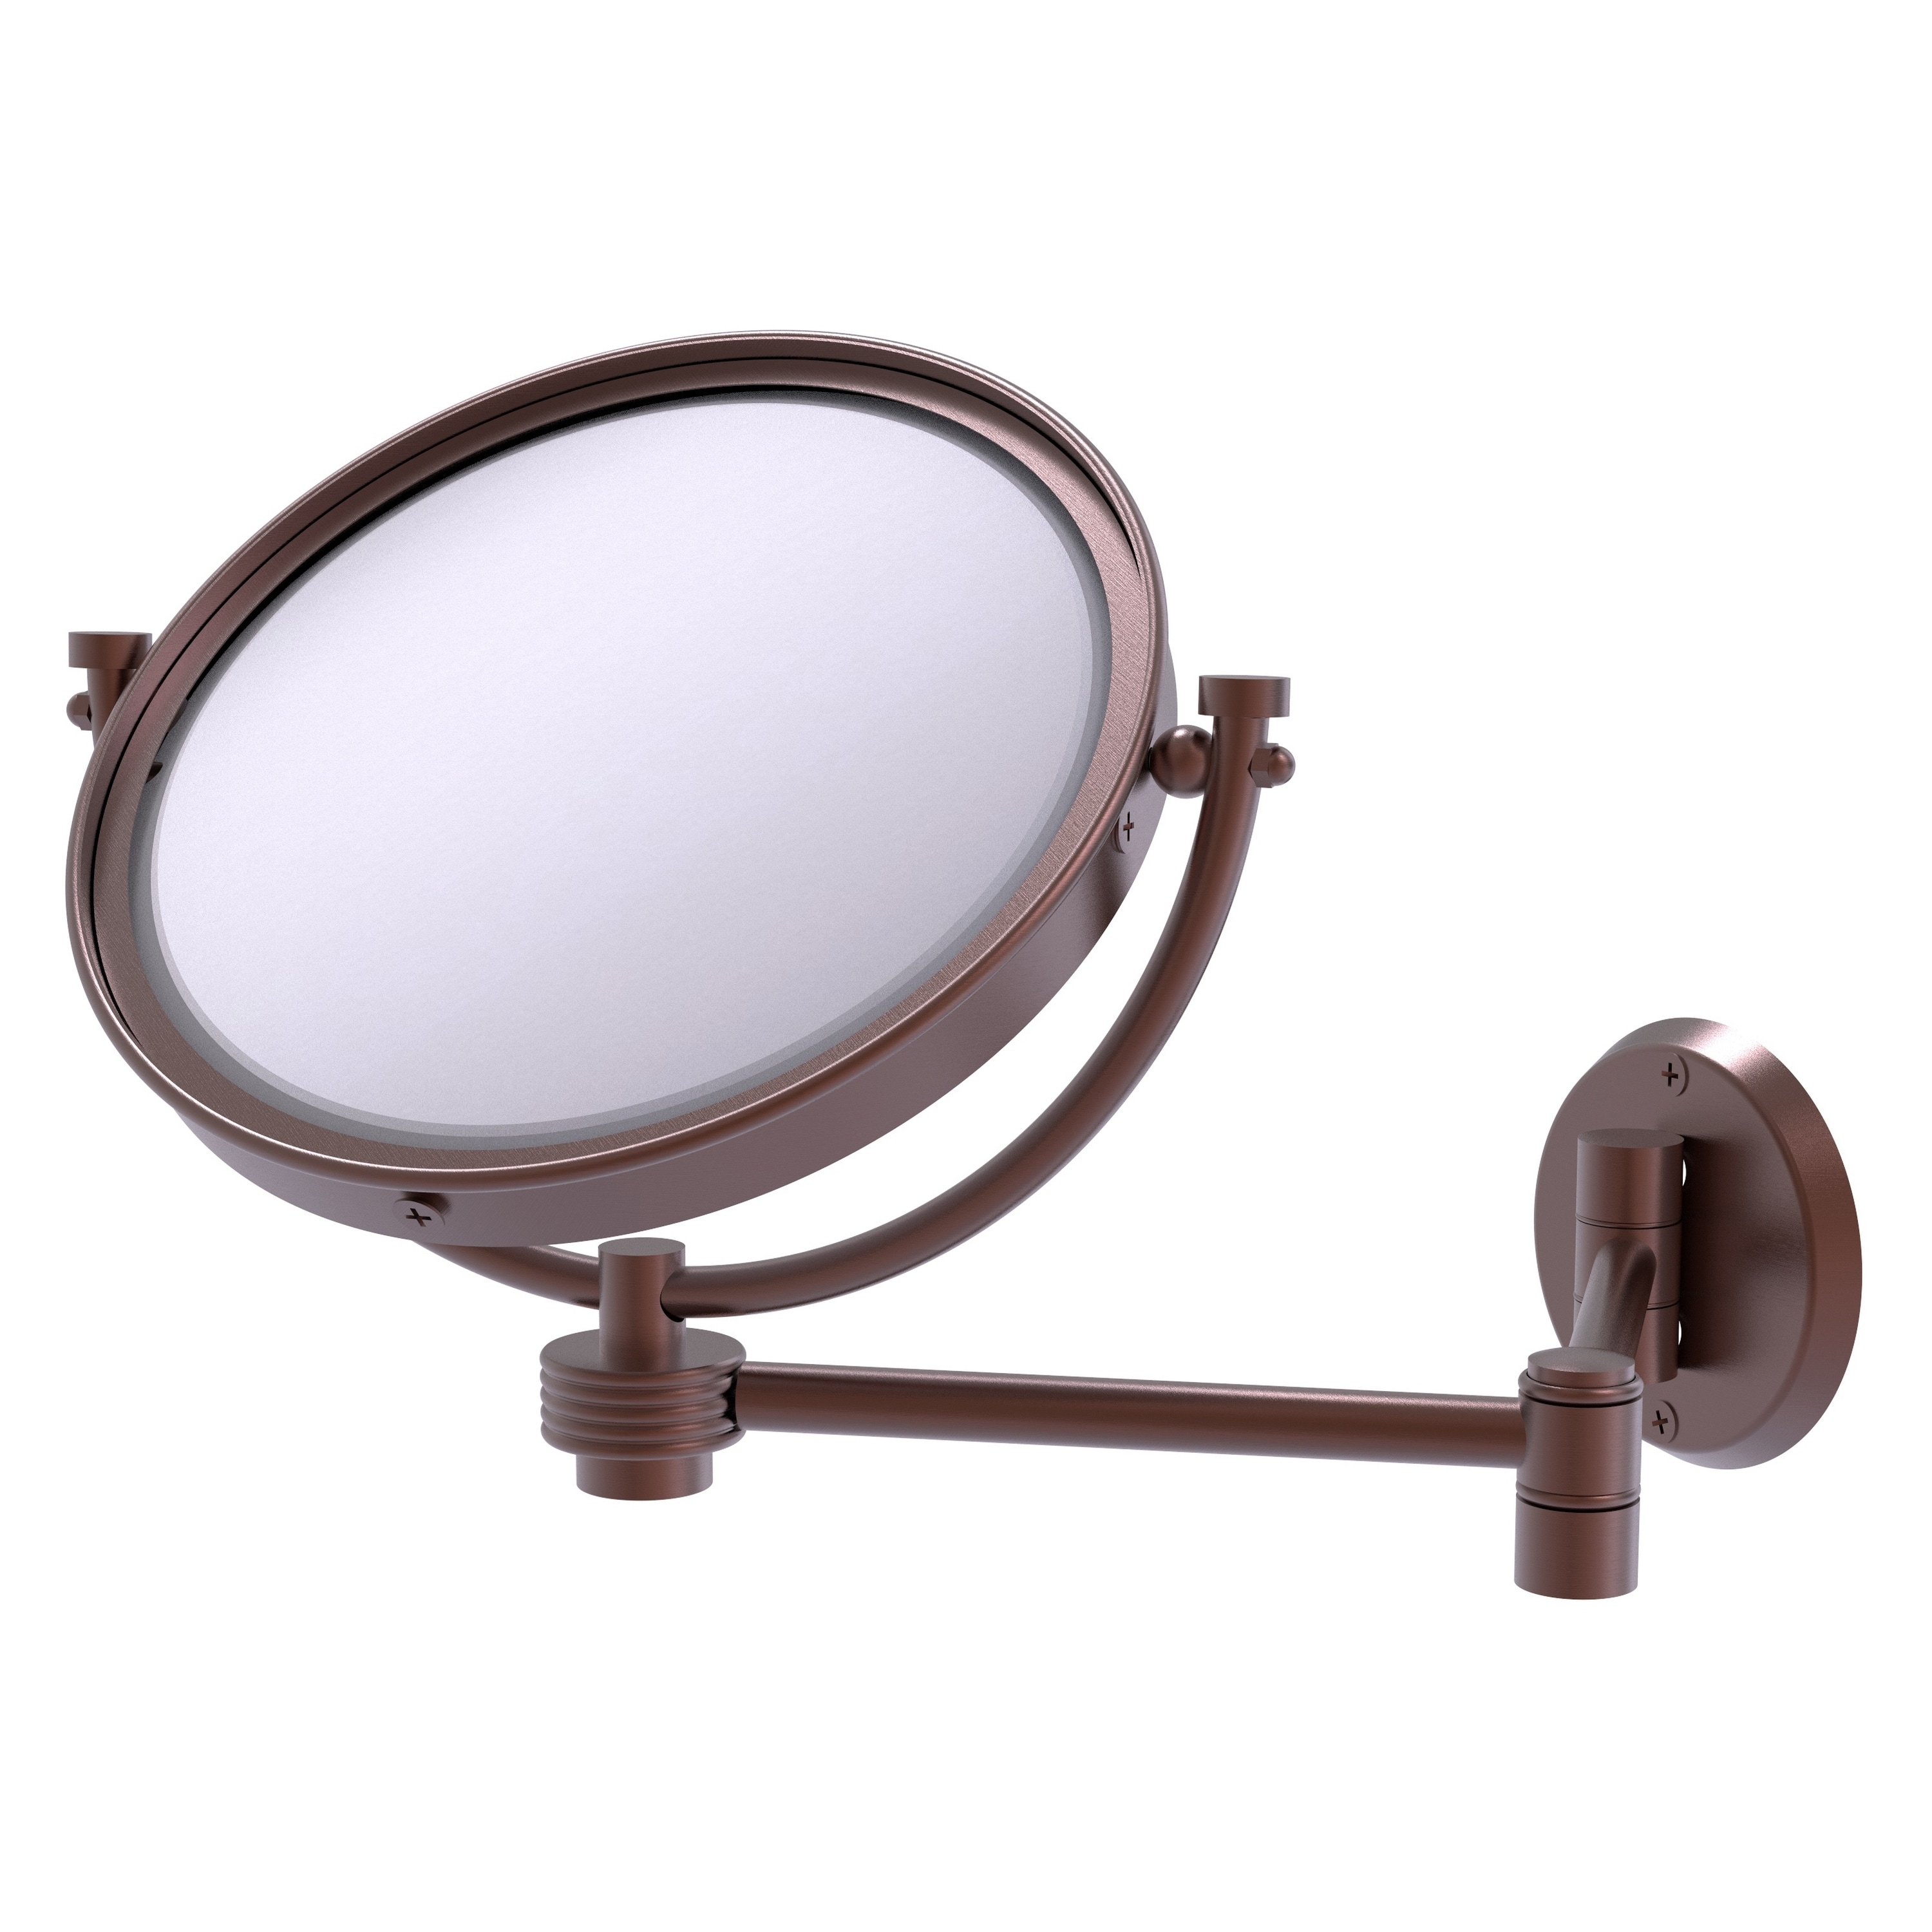 8-in x 10-in Antique Copper Double-sided 5X Magnifying Wall-mounted Vanity Mirror | - Allied Brass WM-6G/4X-CA